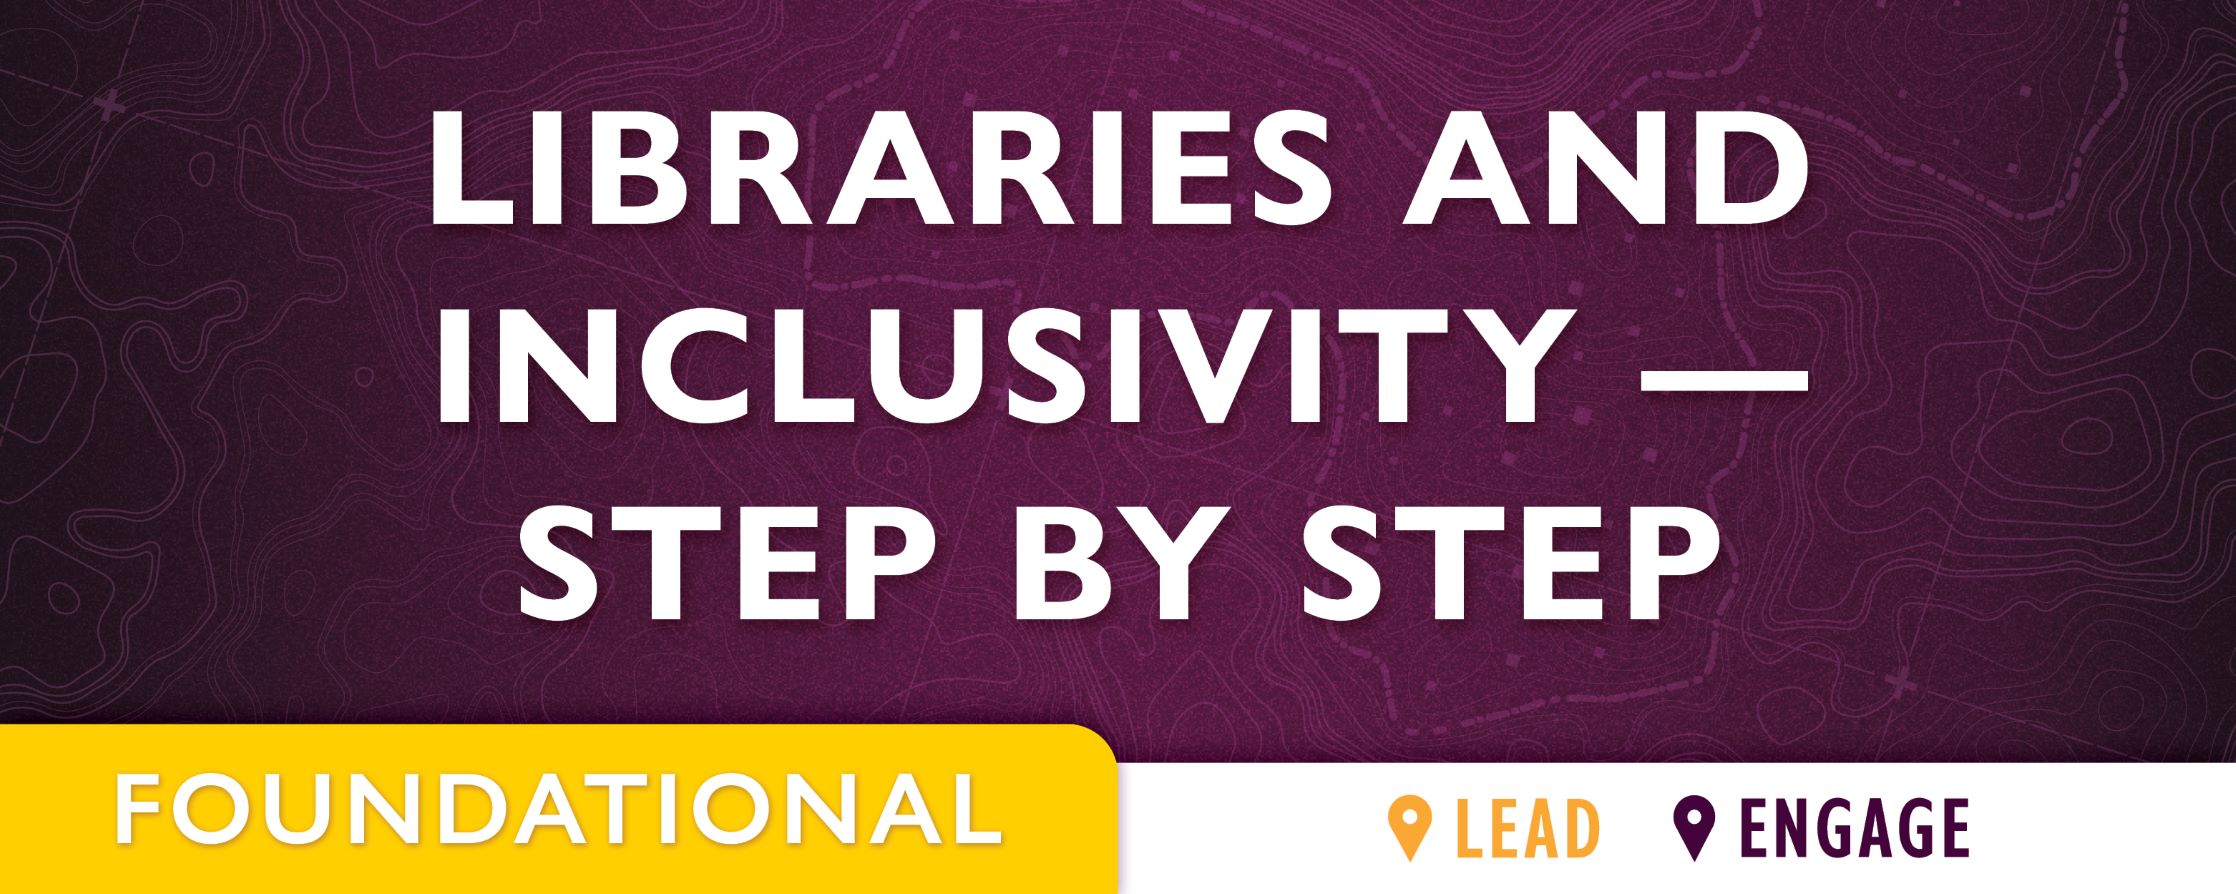 purple background with text: Libraries and Inclusivity - Step by Step 